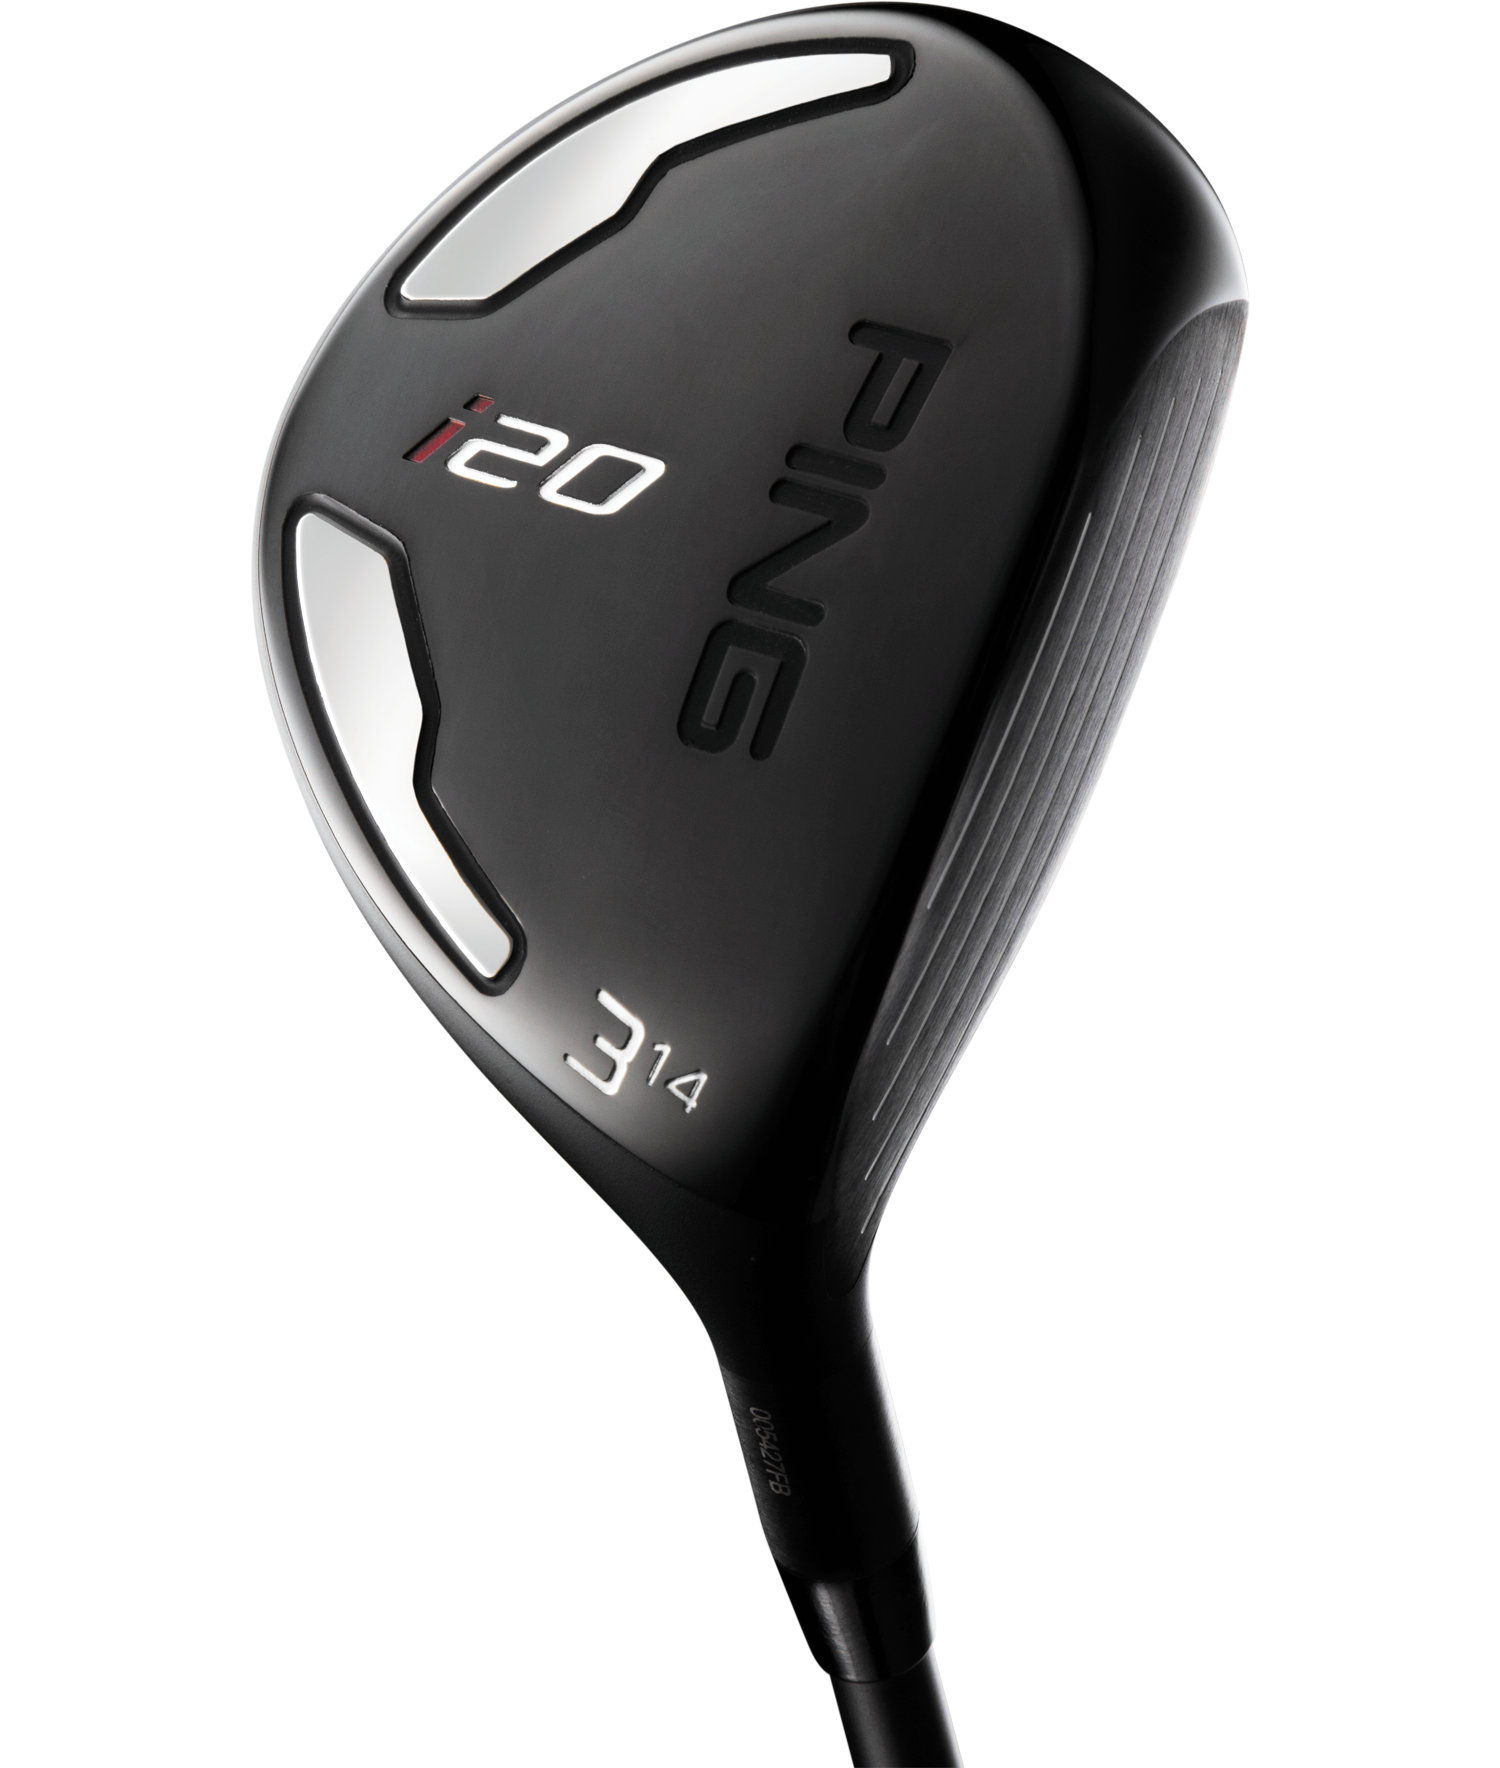 PING i20 Fairway Wood Review